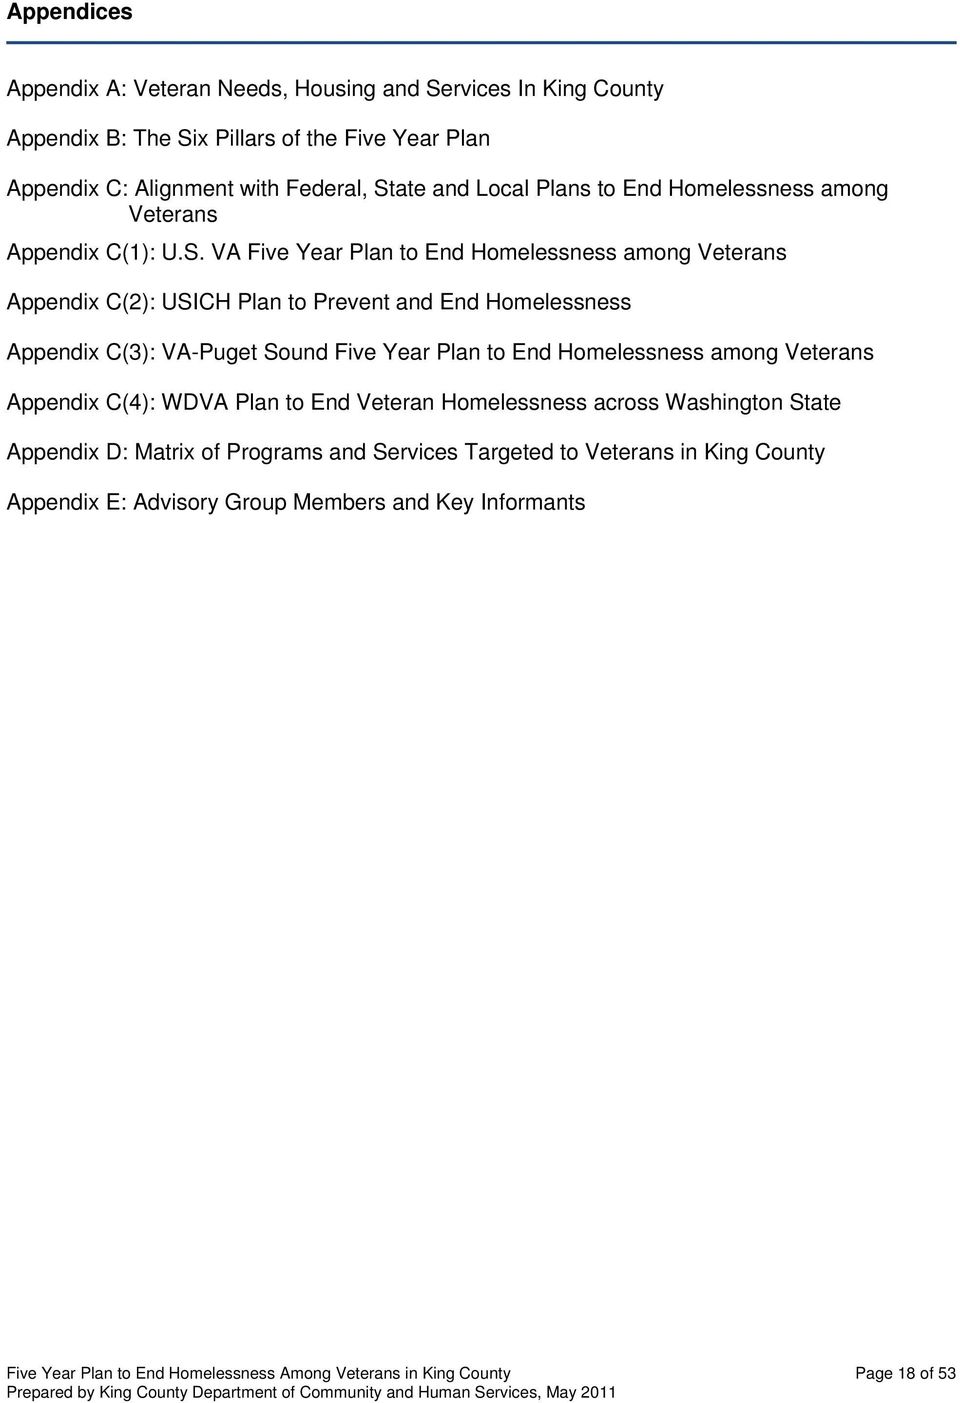 VA Five Year Plan to End Homelessness among Veterans Appendix C(2): USICH Plan to Prevent and End Homelessness Appendix C(3): VA-Puget Sound Five Year Plan to End Homelessness among Veterans